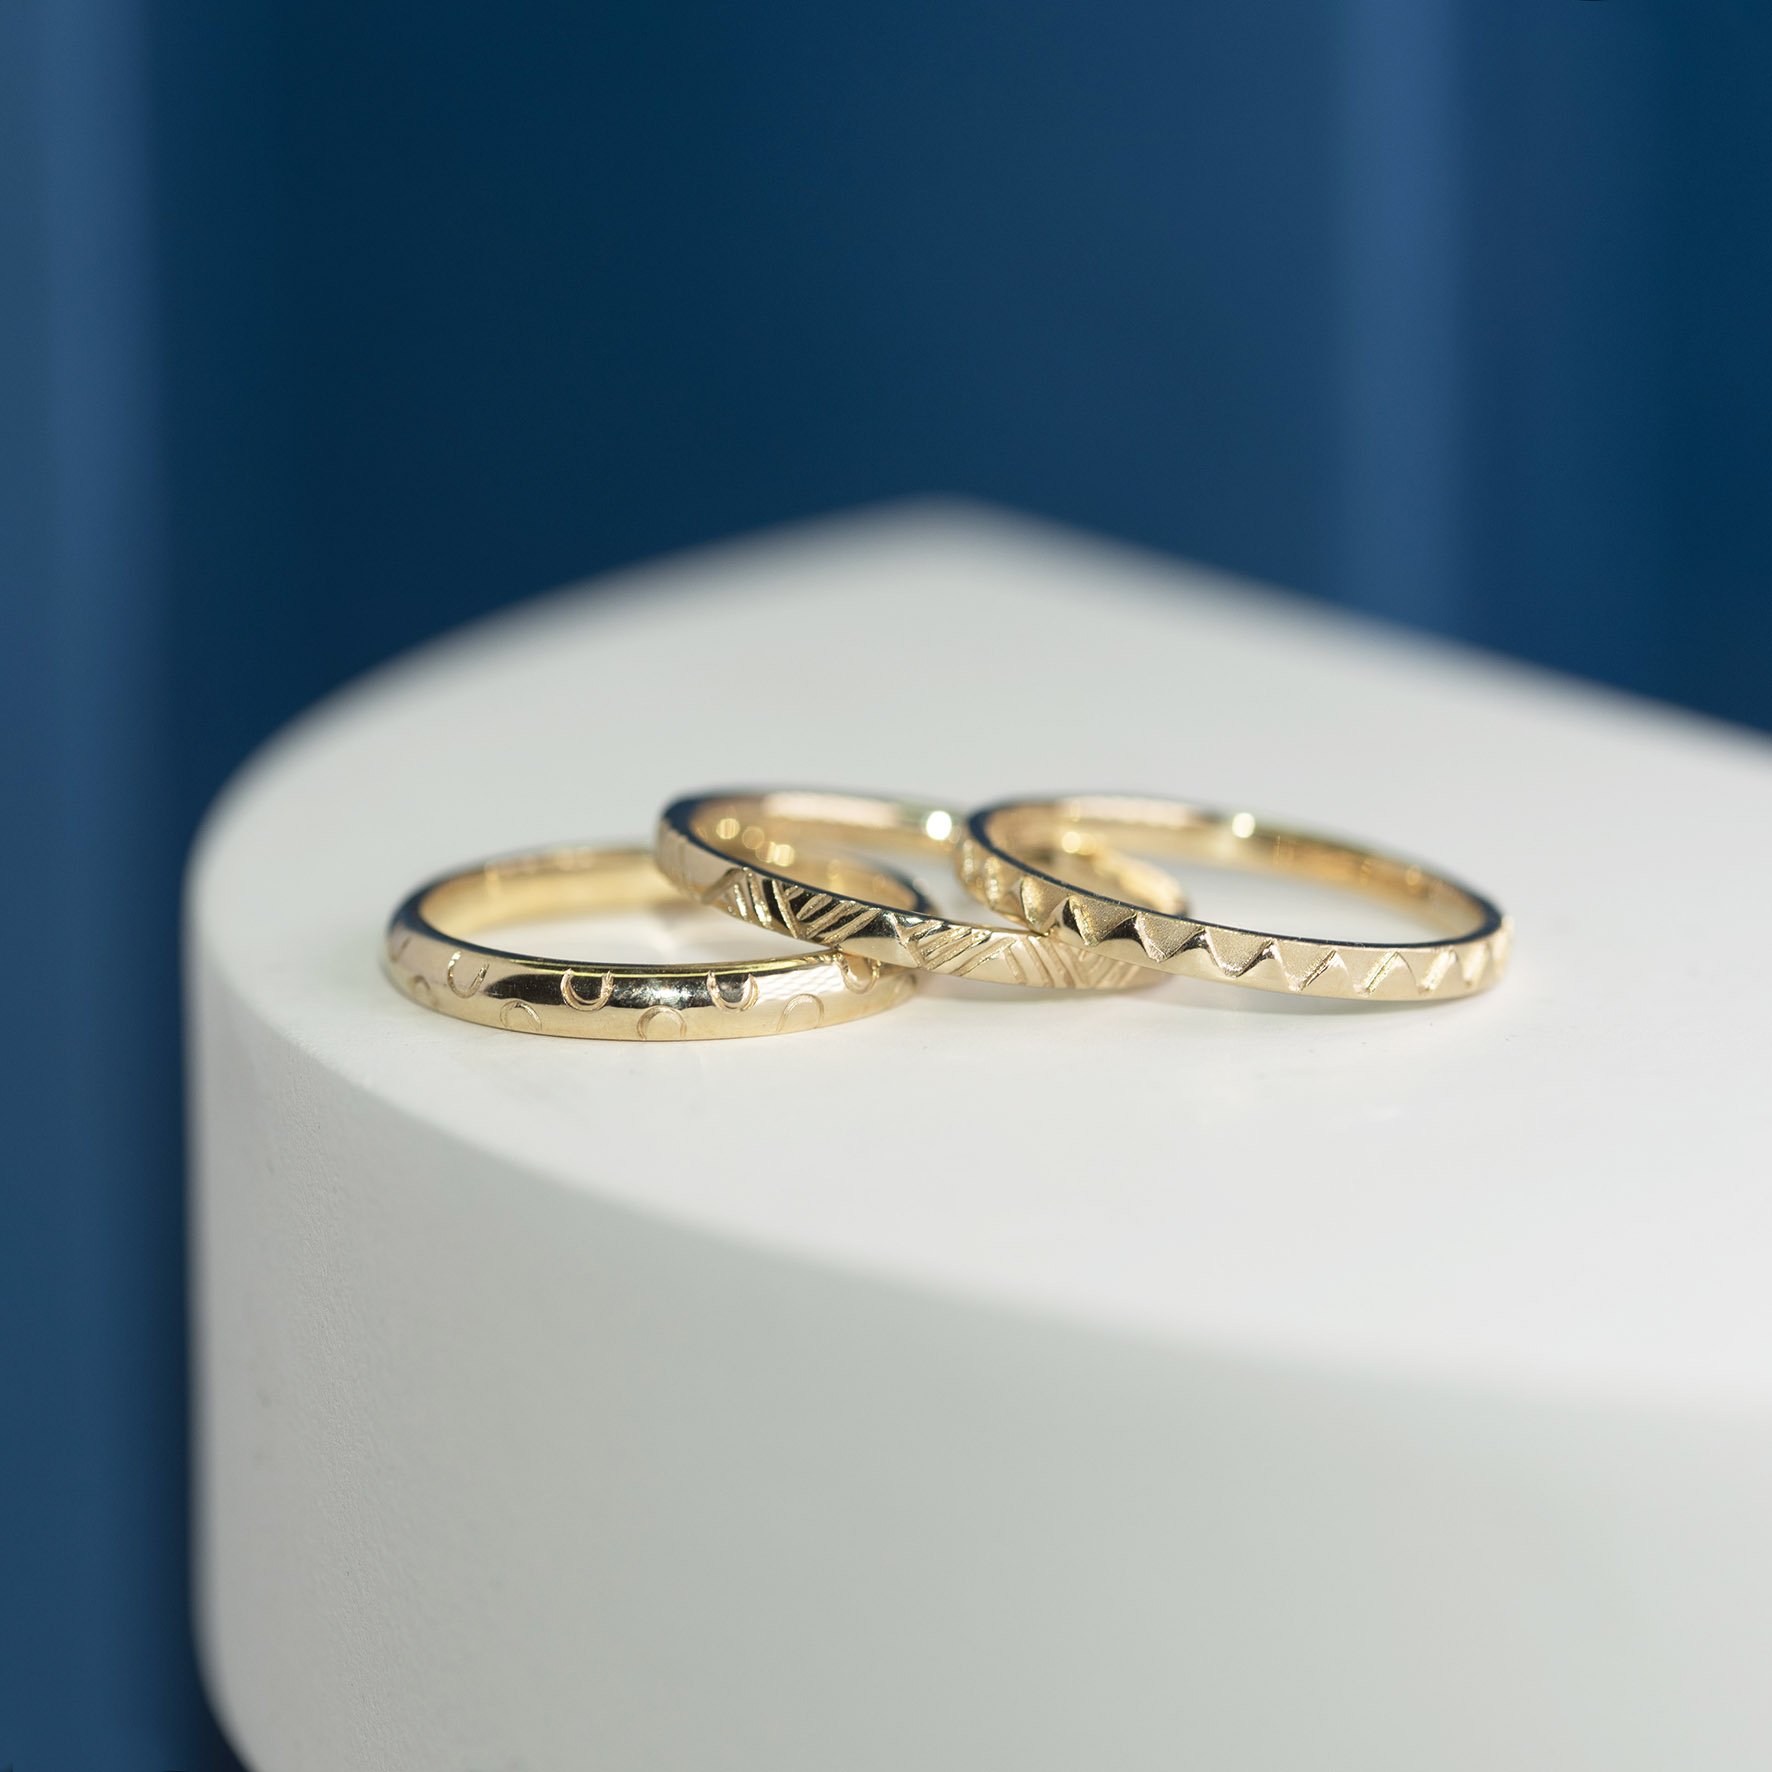  Three bespoke, slim, gold wedding bands all with slightly different subtle graphic patterns on the outside. 